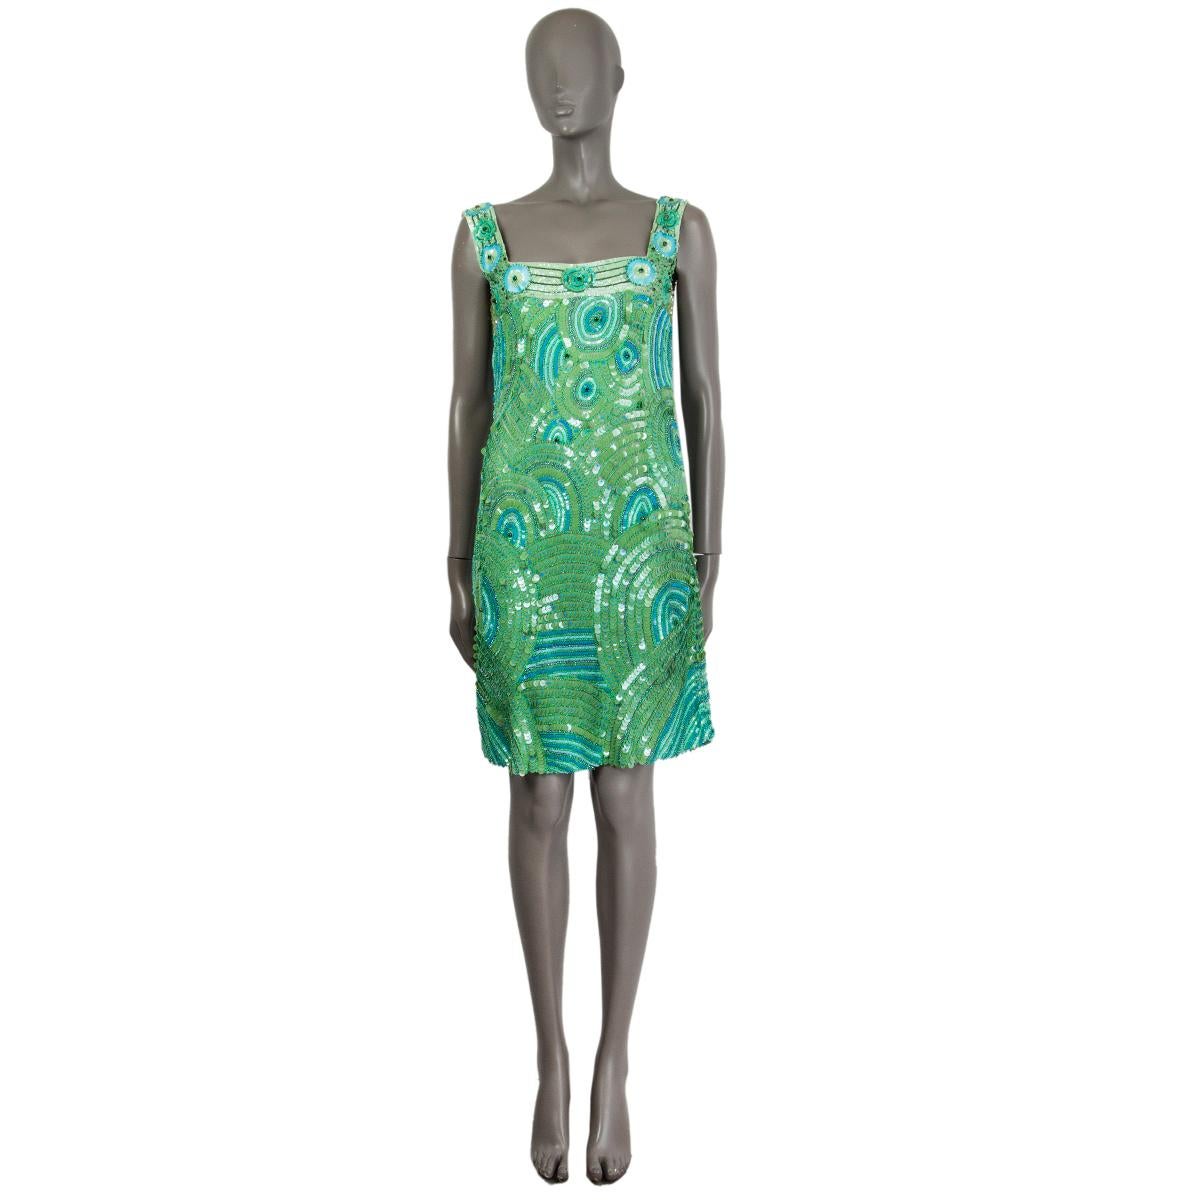 100% authentic Blumarine sleeveless peacock-sequins shift dress in chartreuse, blue and emerald polyester (100%) with a square neck. Closes on the side with a concealed zipper. Lined in viscose (100%). Has been worn and is in excellent